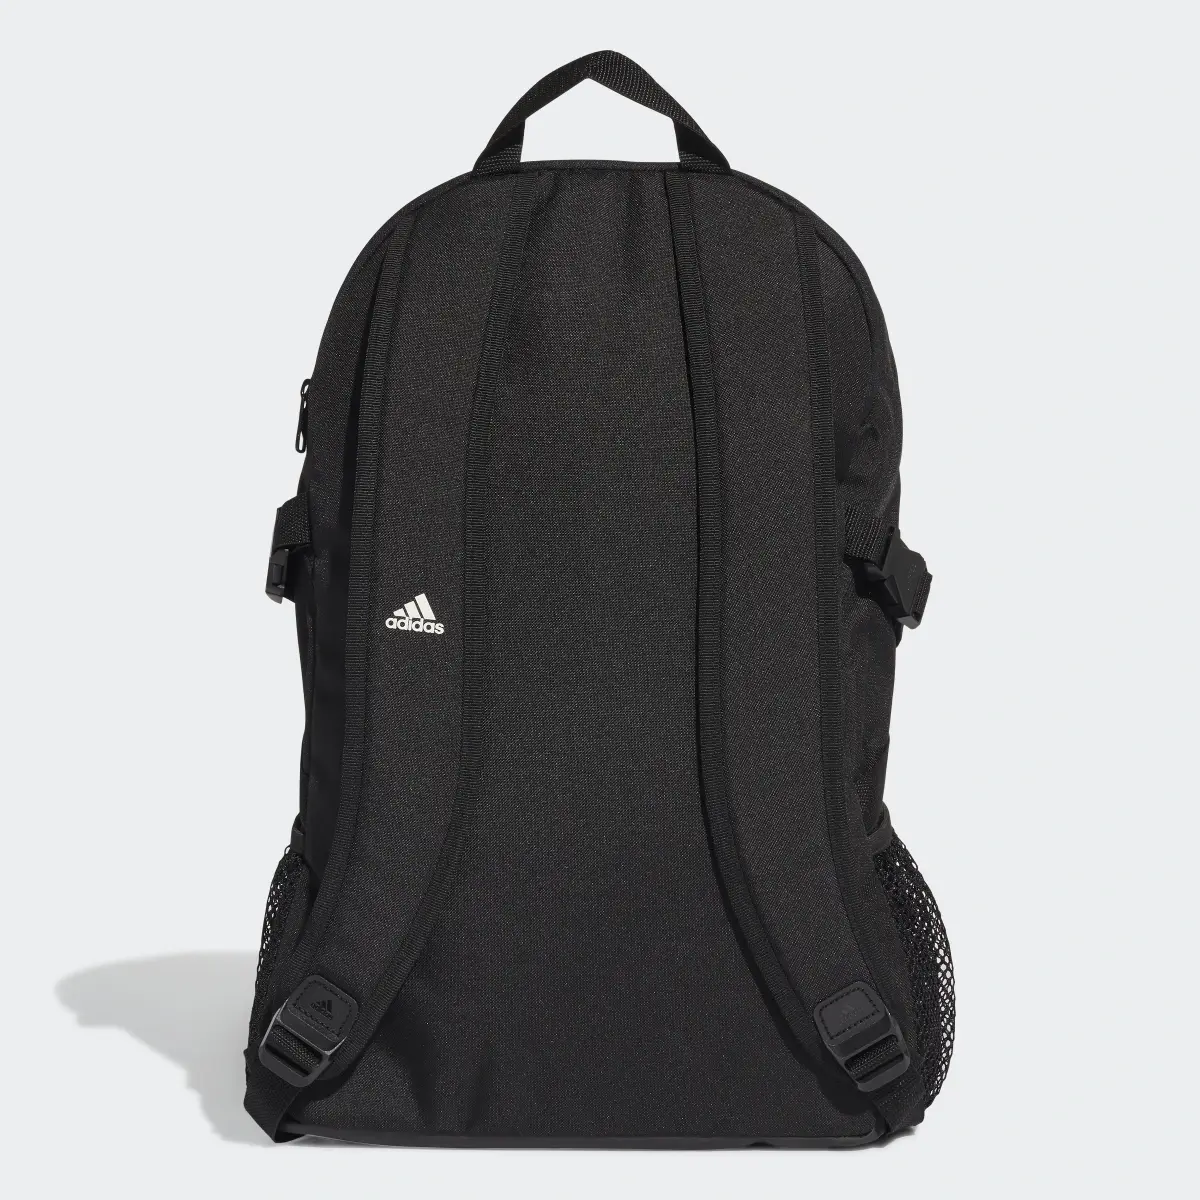 Adidas Power 5 Backpack. 3